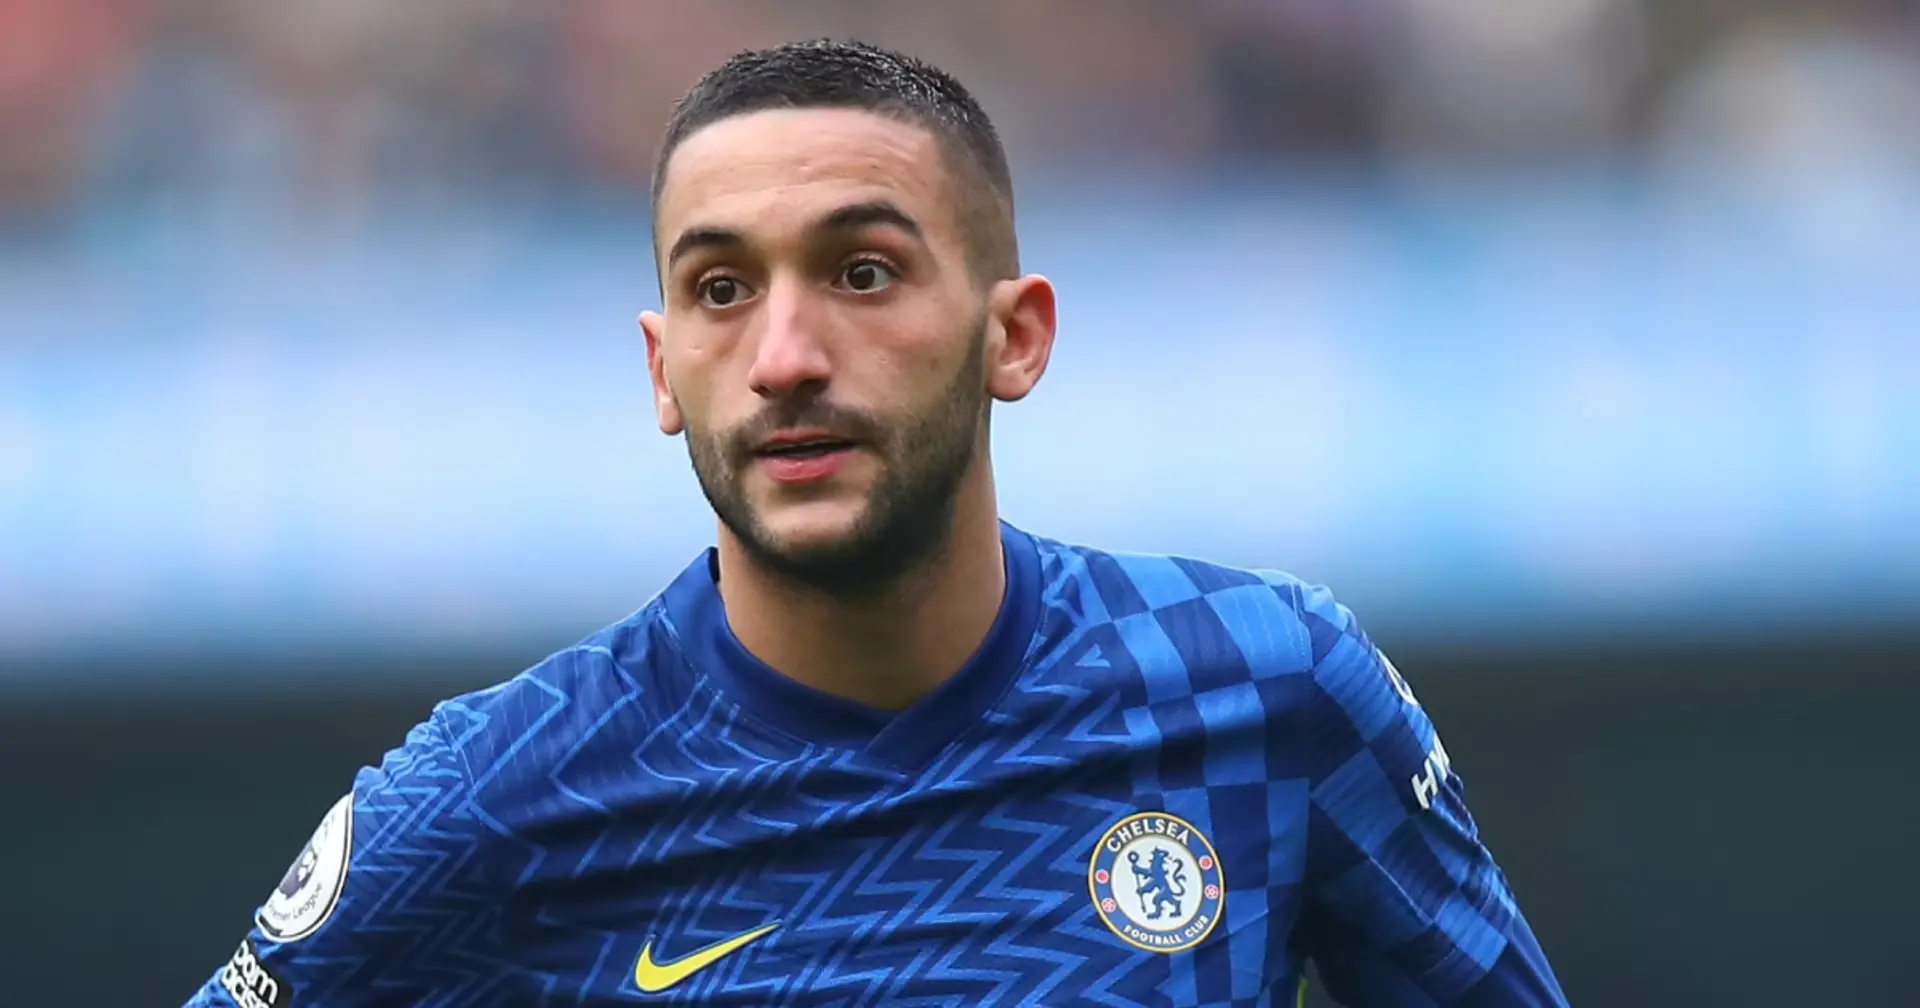 PSG discuss Ziyech loan, not permanent transfer with Chelsea (reliability: 5 stars)